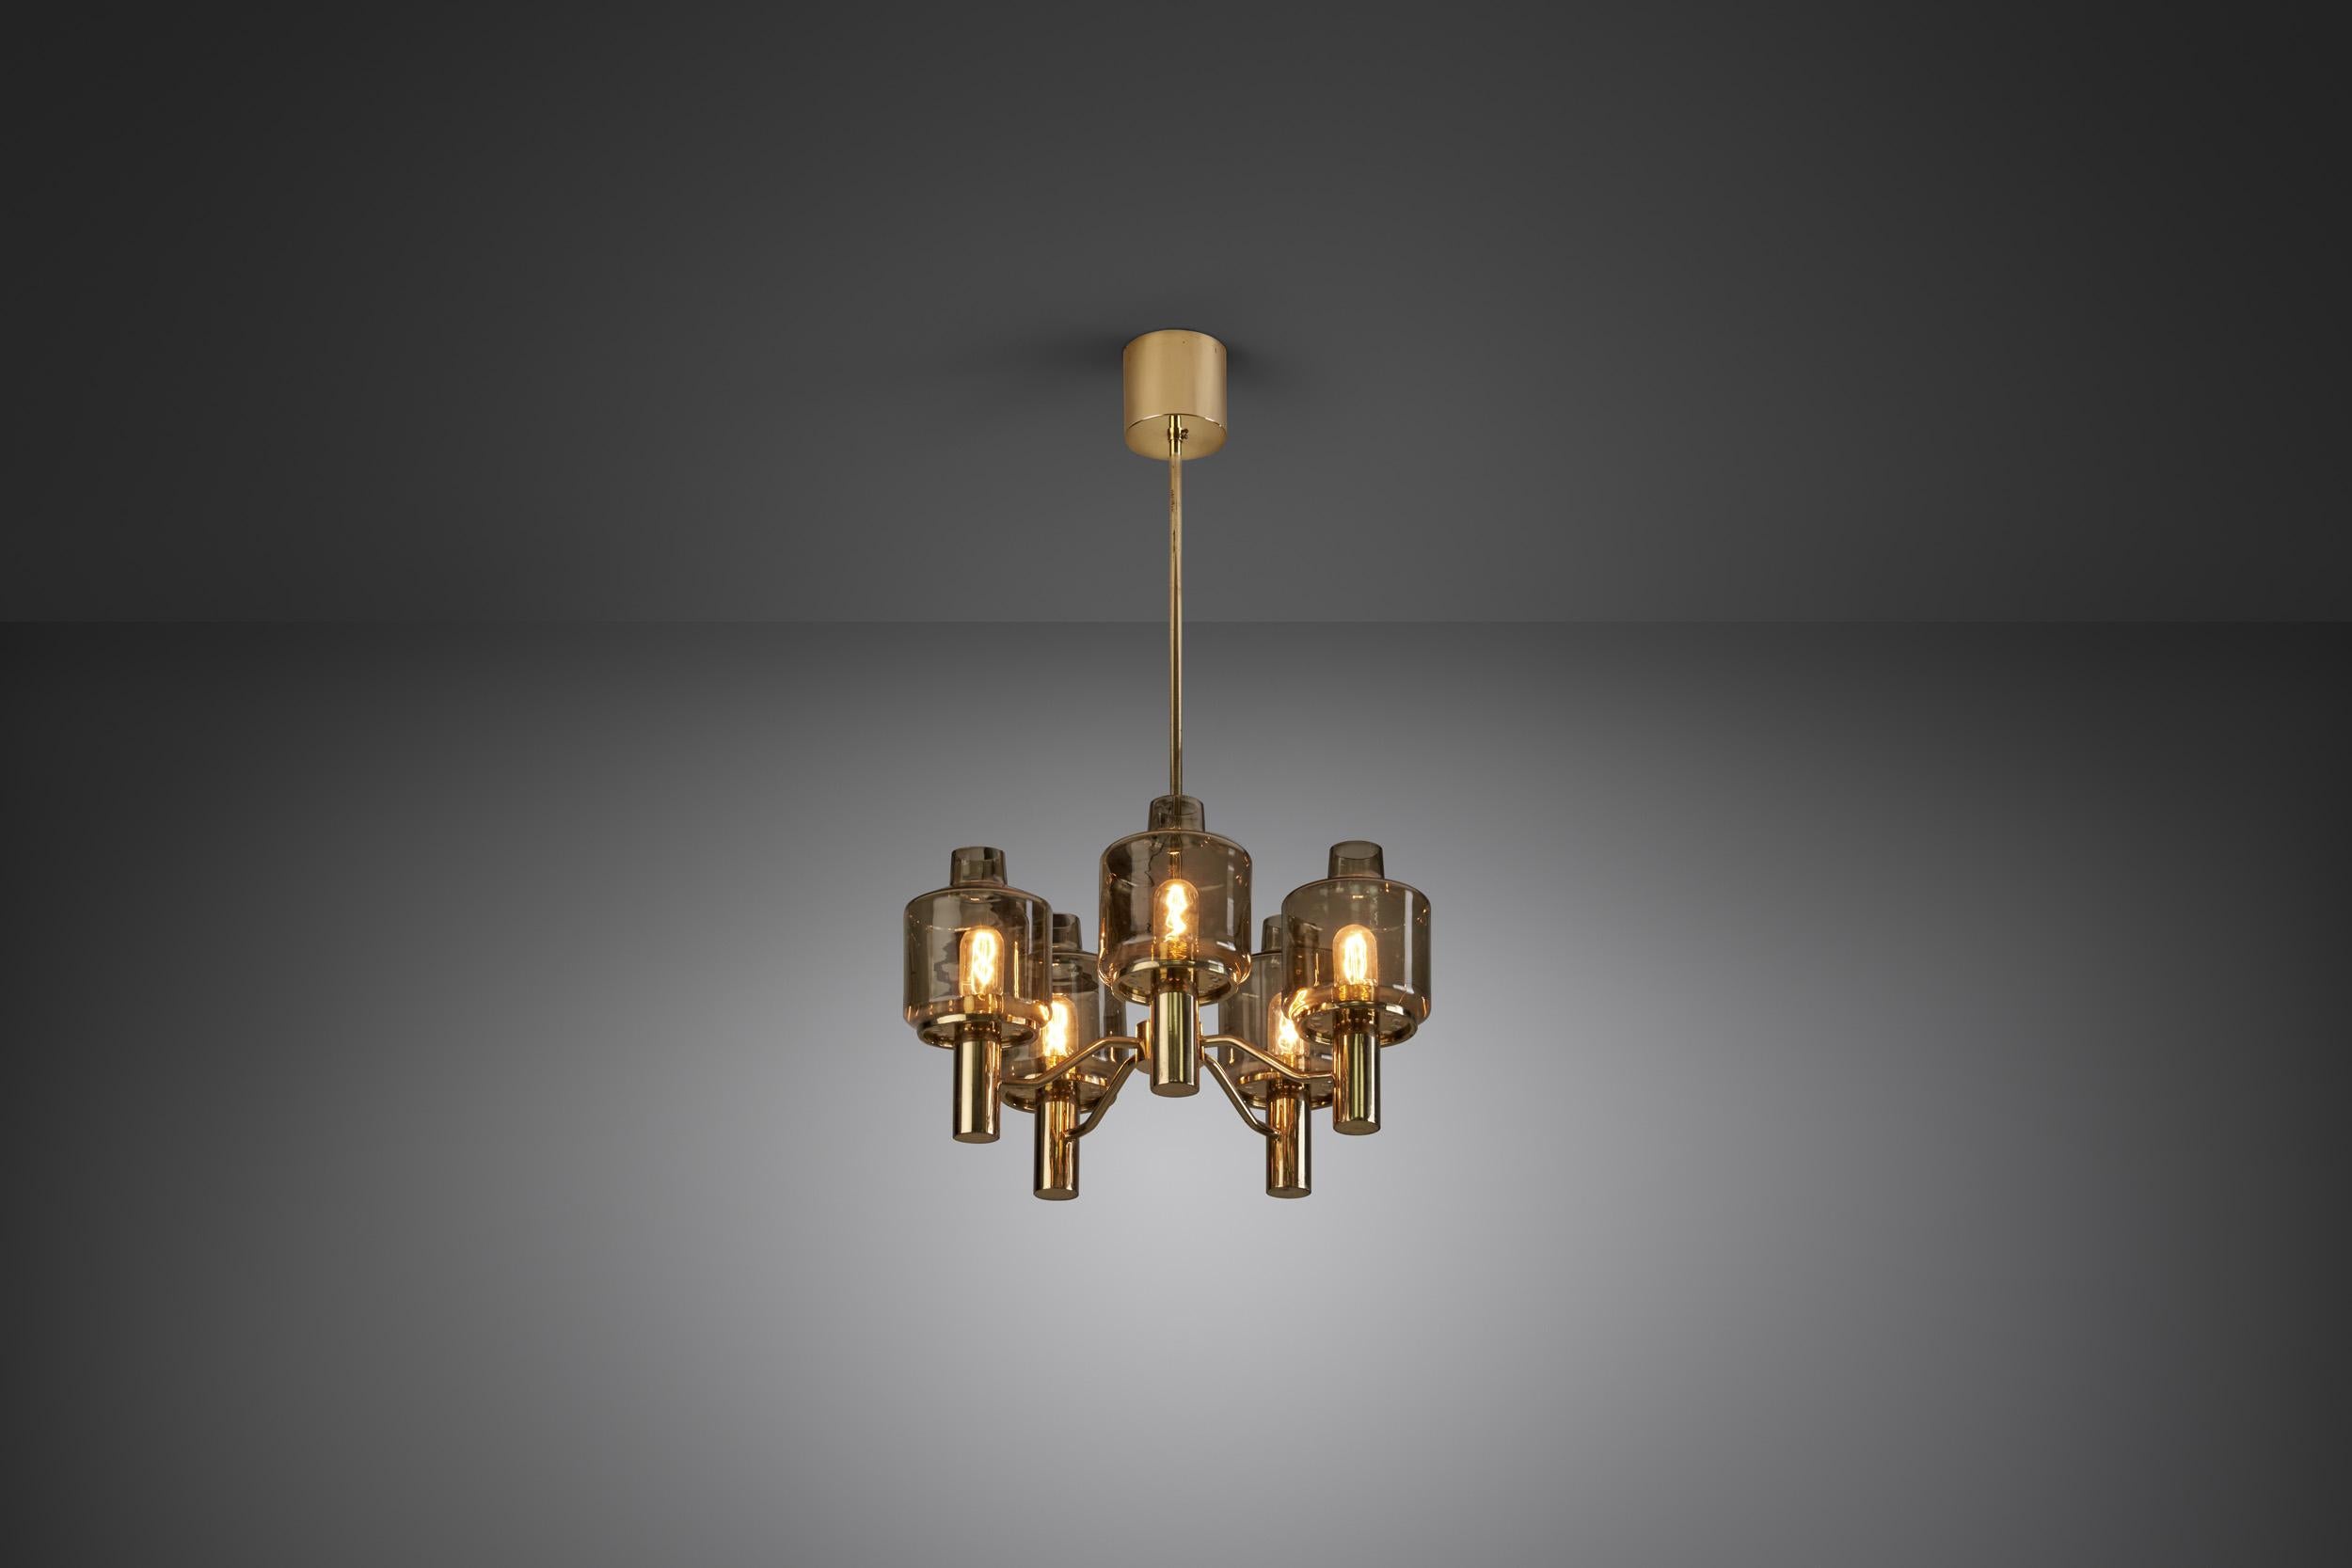 This marvellous, brass five-light chandelier was created in what we now call “the golden age of Scandinavian design”. Hans-Agne Jakobsson was the great Swedish master of lighting, designing some of the most recognizable mid-century modern lamps of